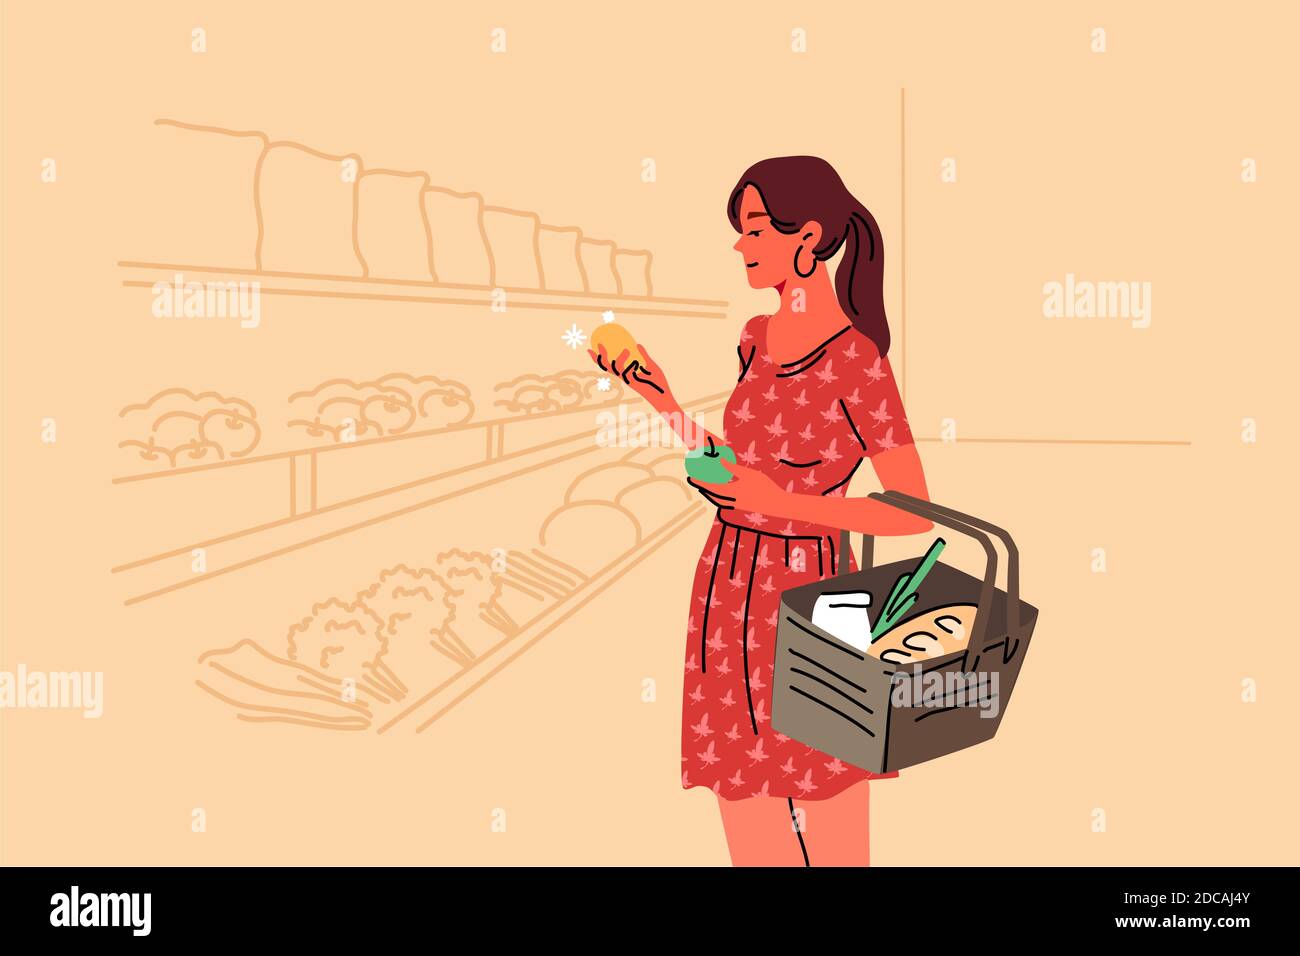 Shopping, sale, coice, store, buy concept. Young woman buyer consumer customer character choosing food products in grocery shop supermarket holding fr Stock Vector